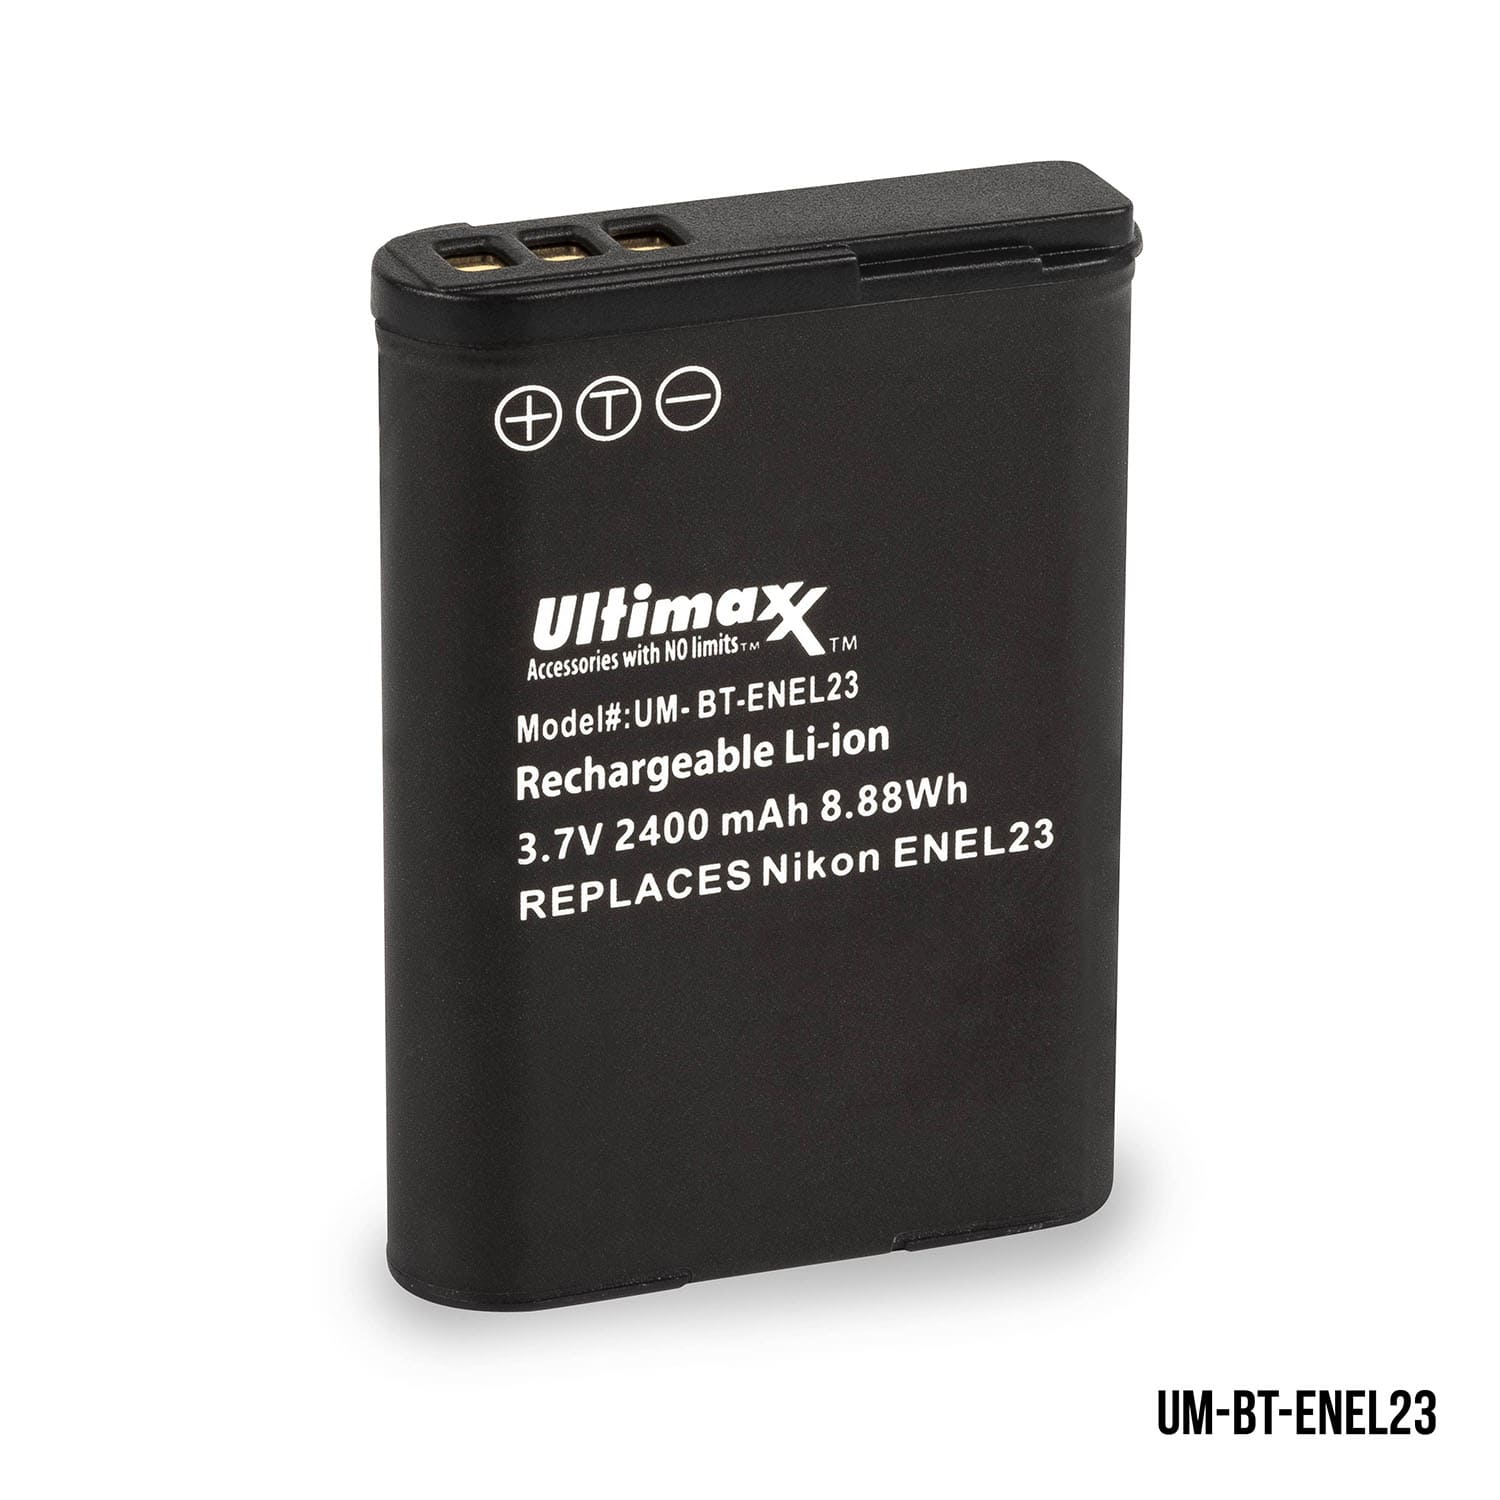 & Cameras Rechargeable Cameras Ultimaxx Video for Batteries -